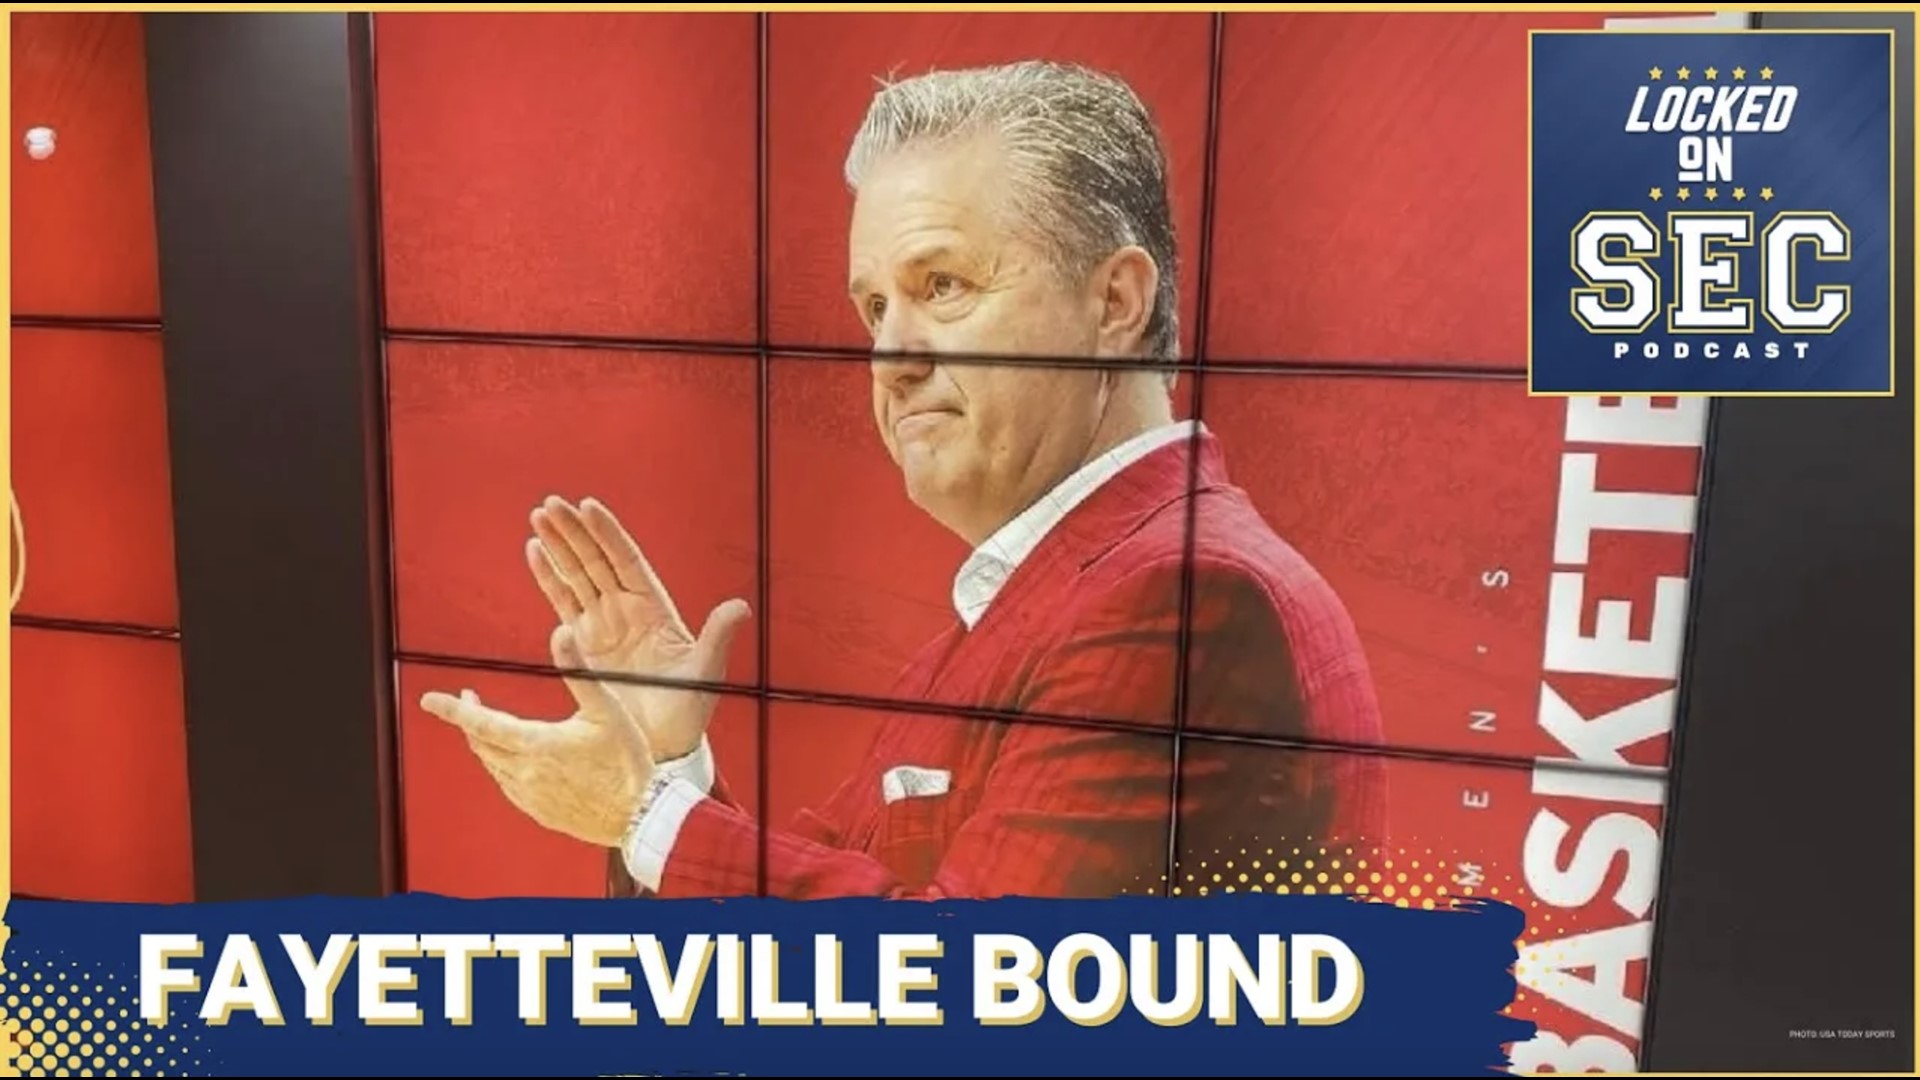 On today's show we discuss John Calipari dropping a farewell video to Big Blue Nation as Mitch Barnhart makes it official that Cal is leaving Kentucky.